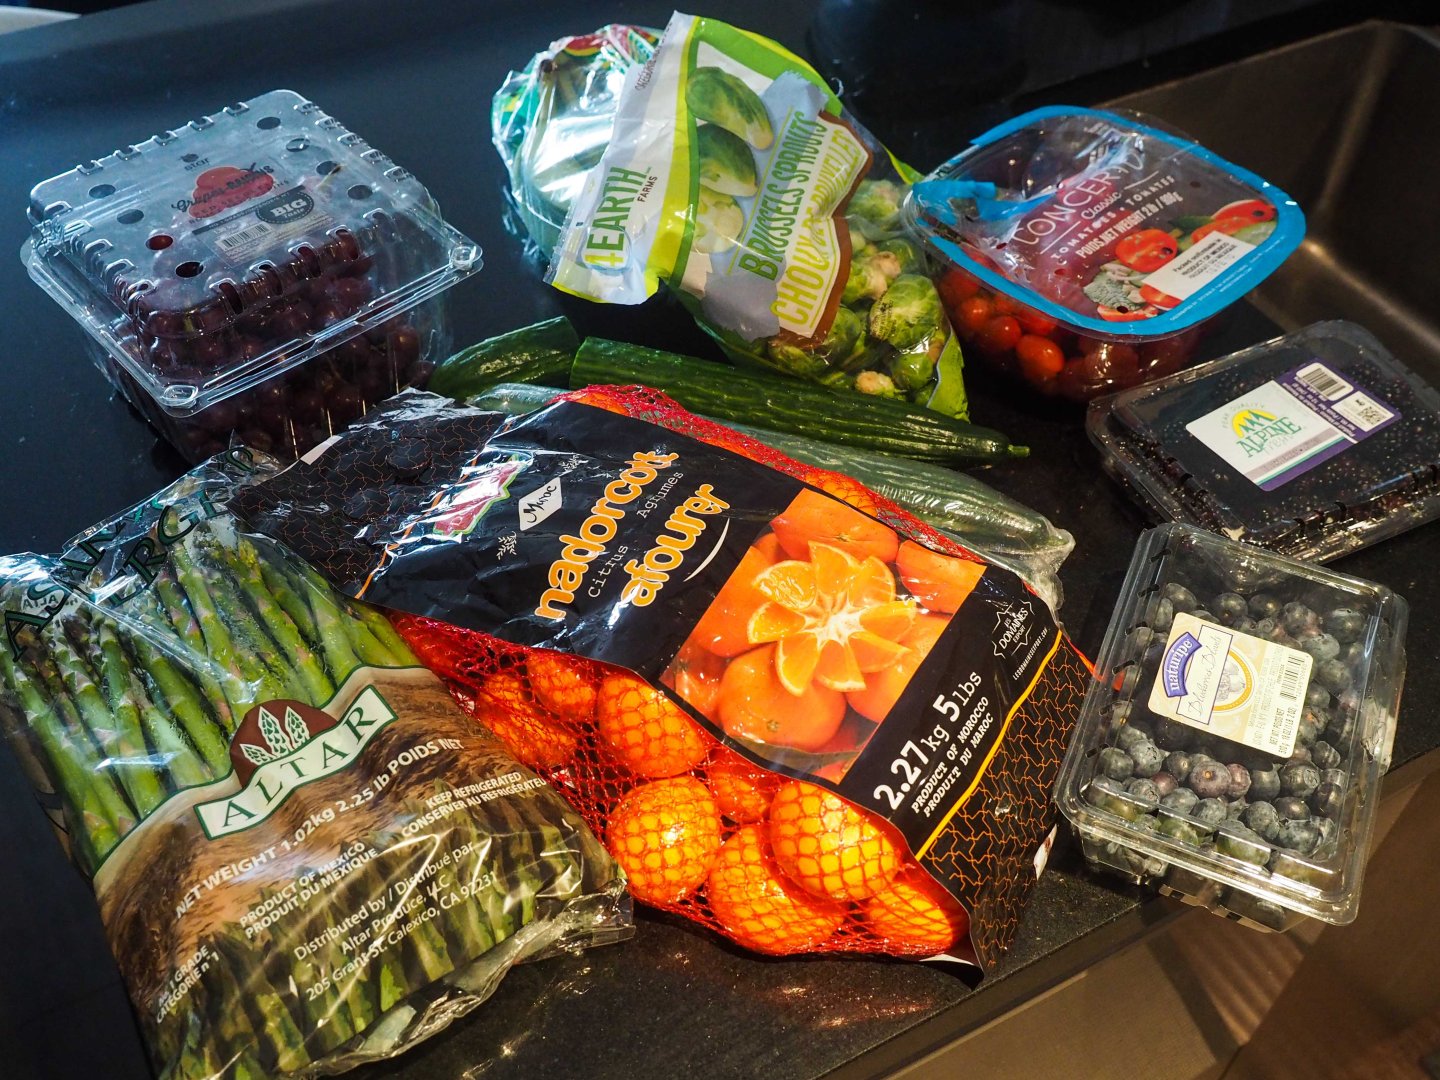 costco, grocery haul, fruits, vegetables, produce